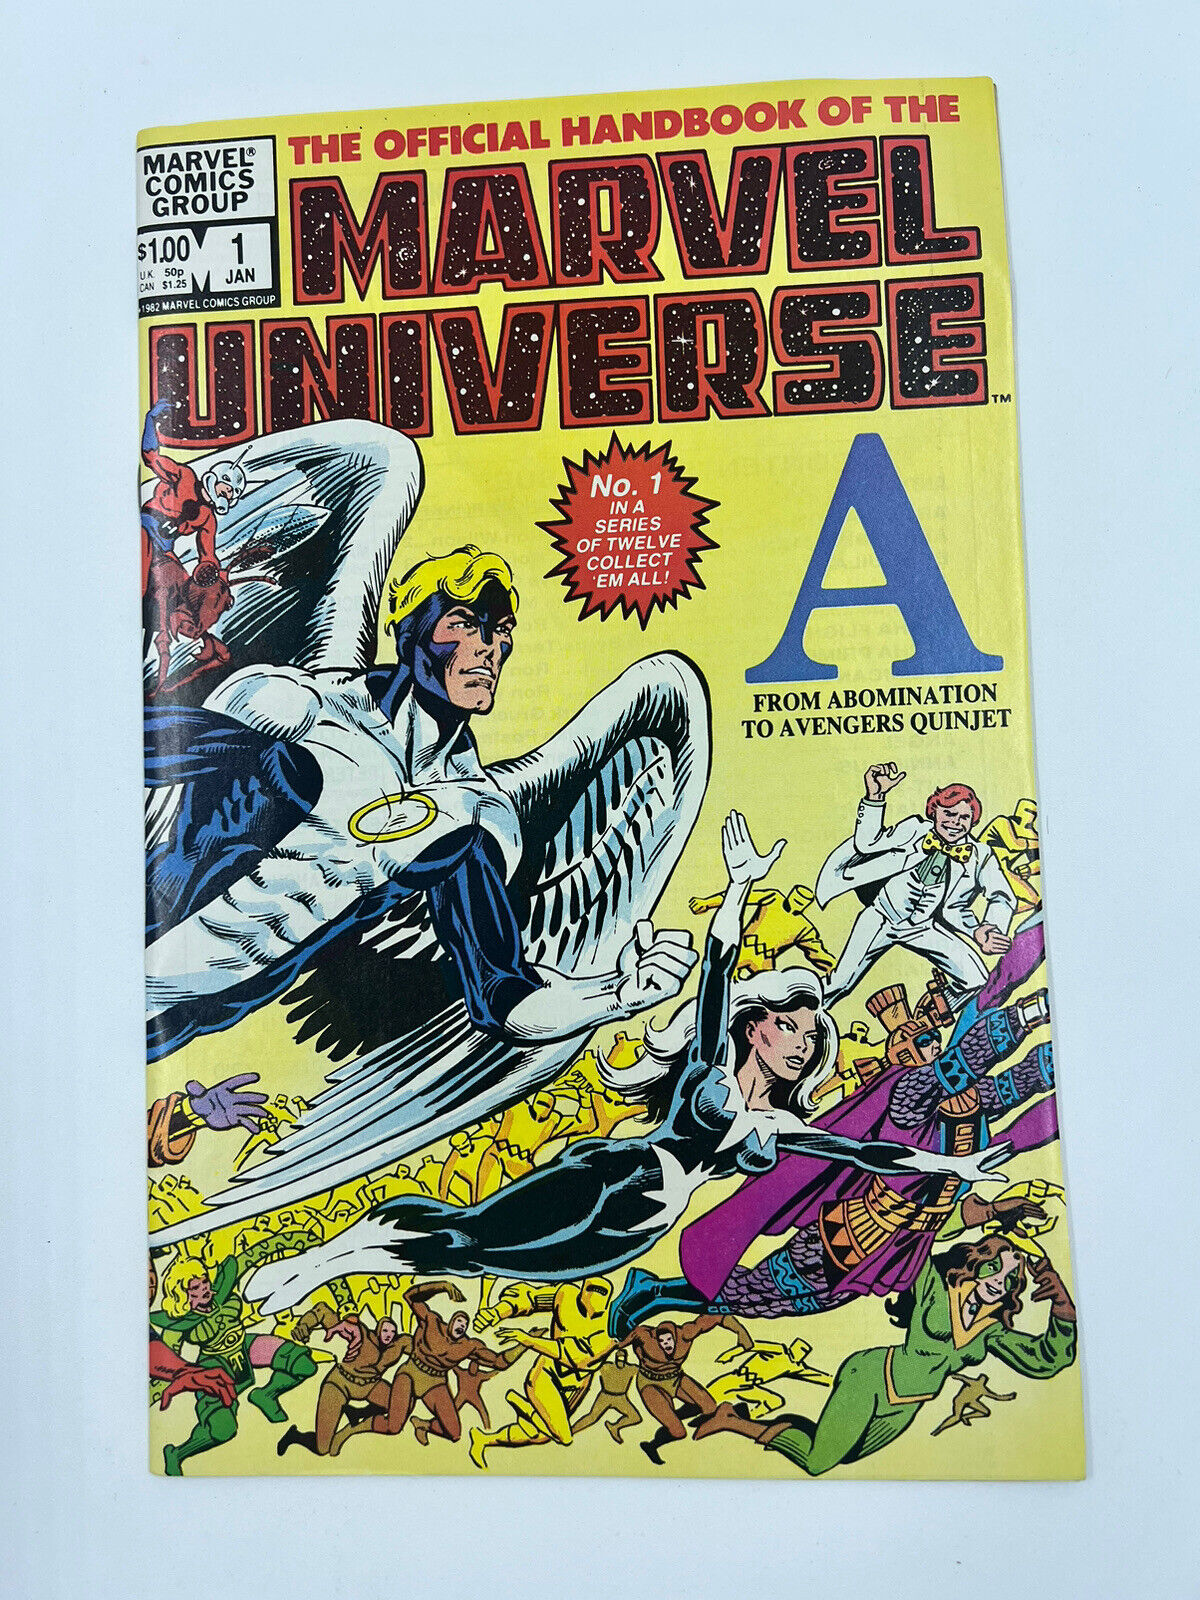 The Official Handbook of the Marvel Universe A #1 - Jan 1982 